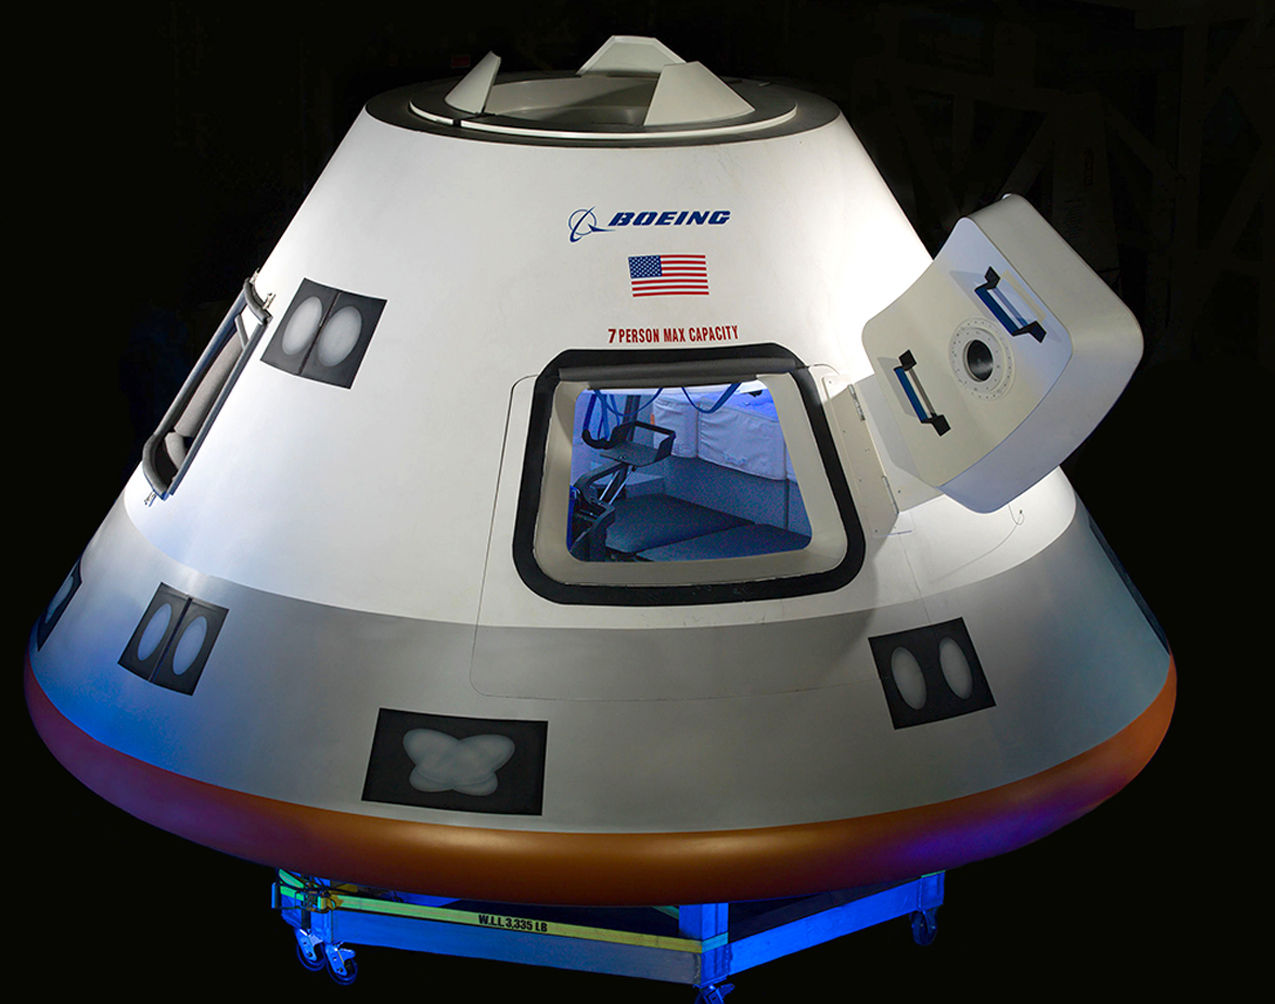 Boeing S Cst 100 Starliner A 21st Century Space Capsule In